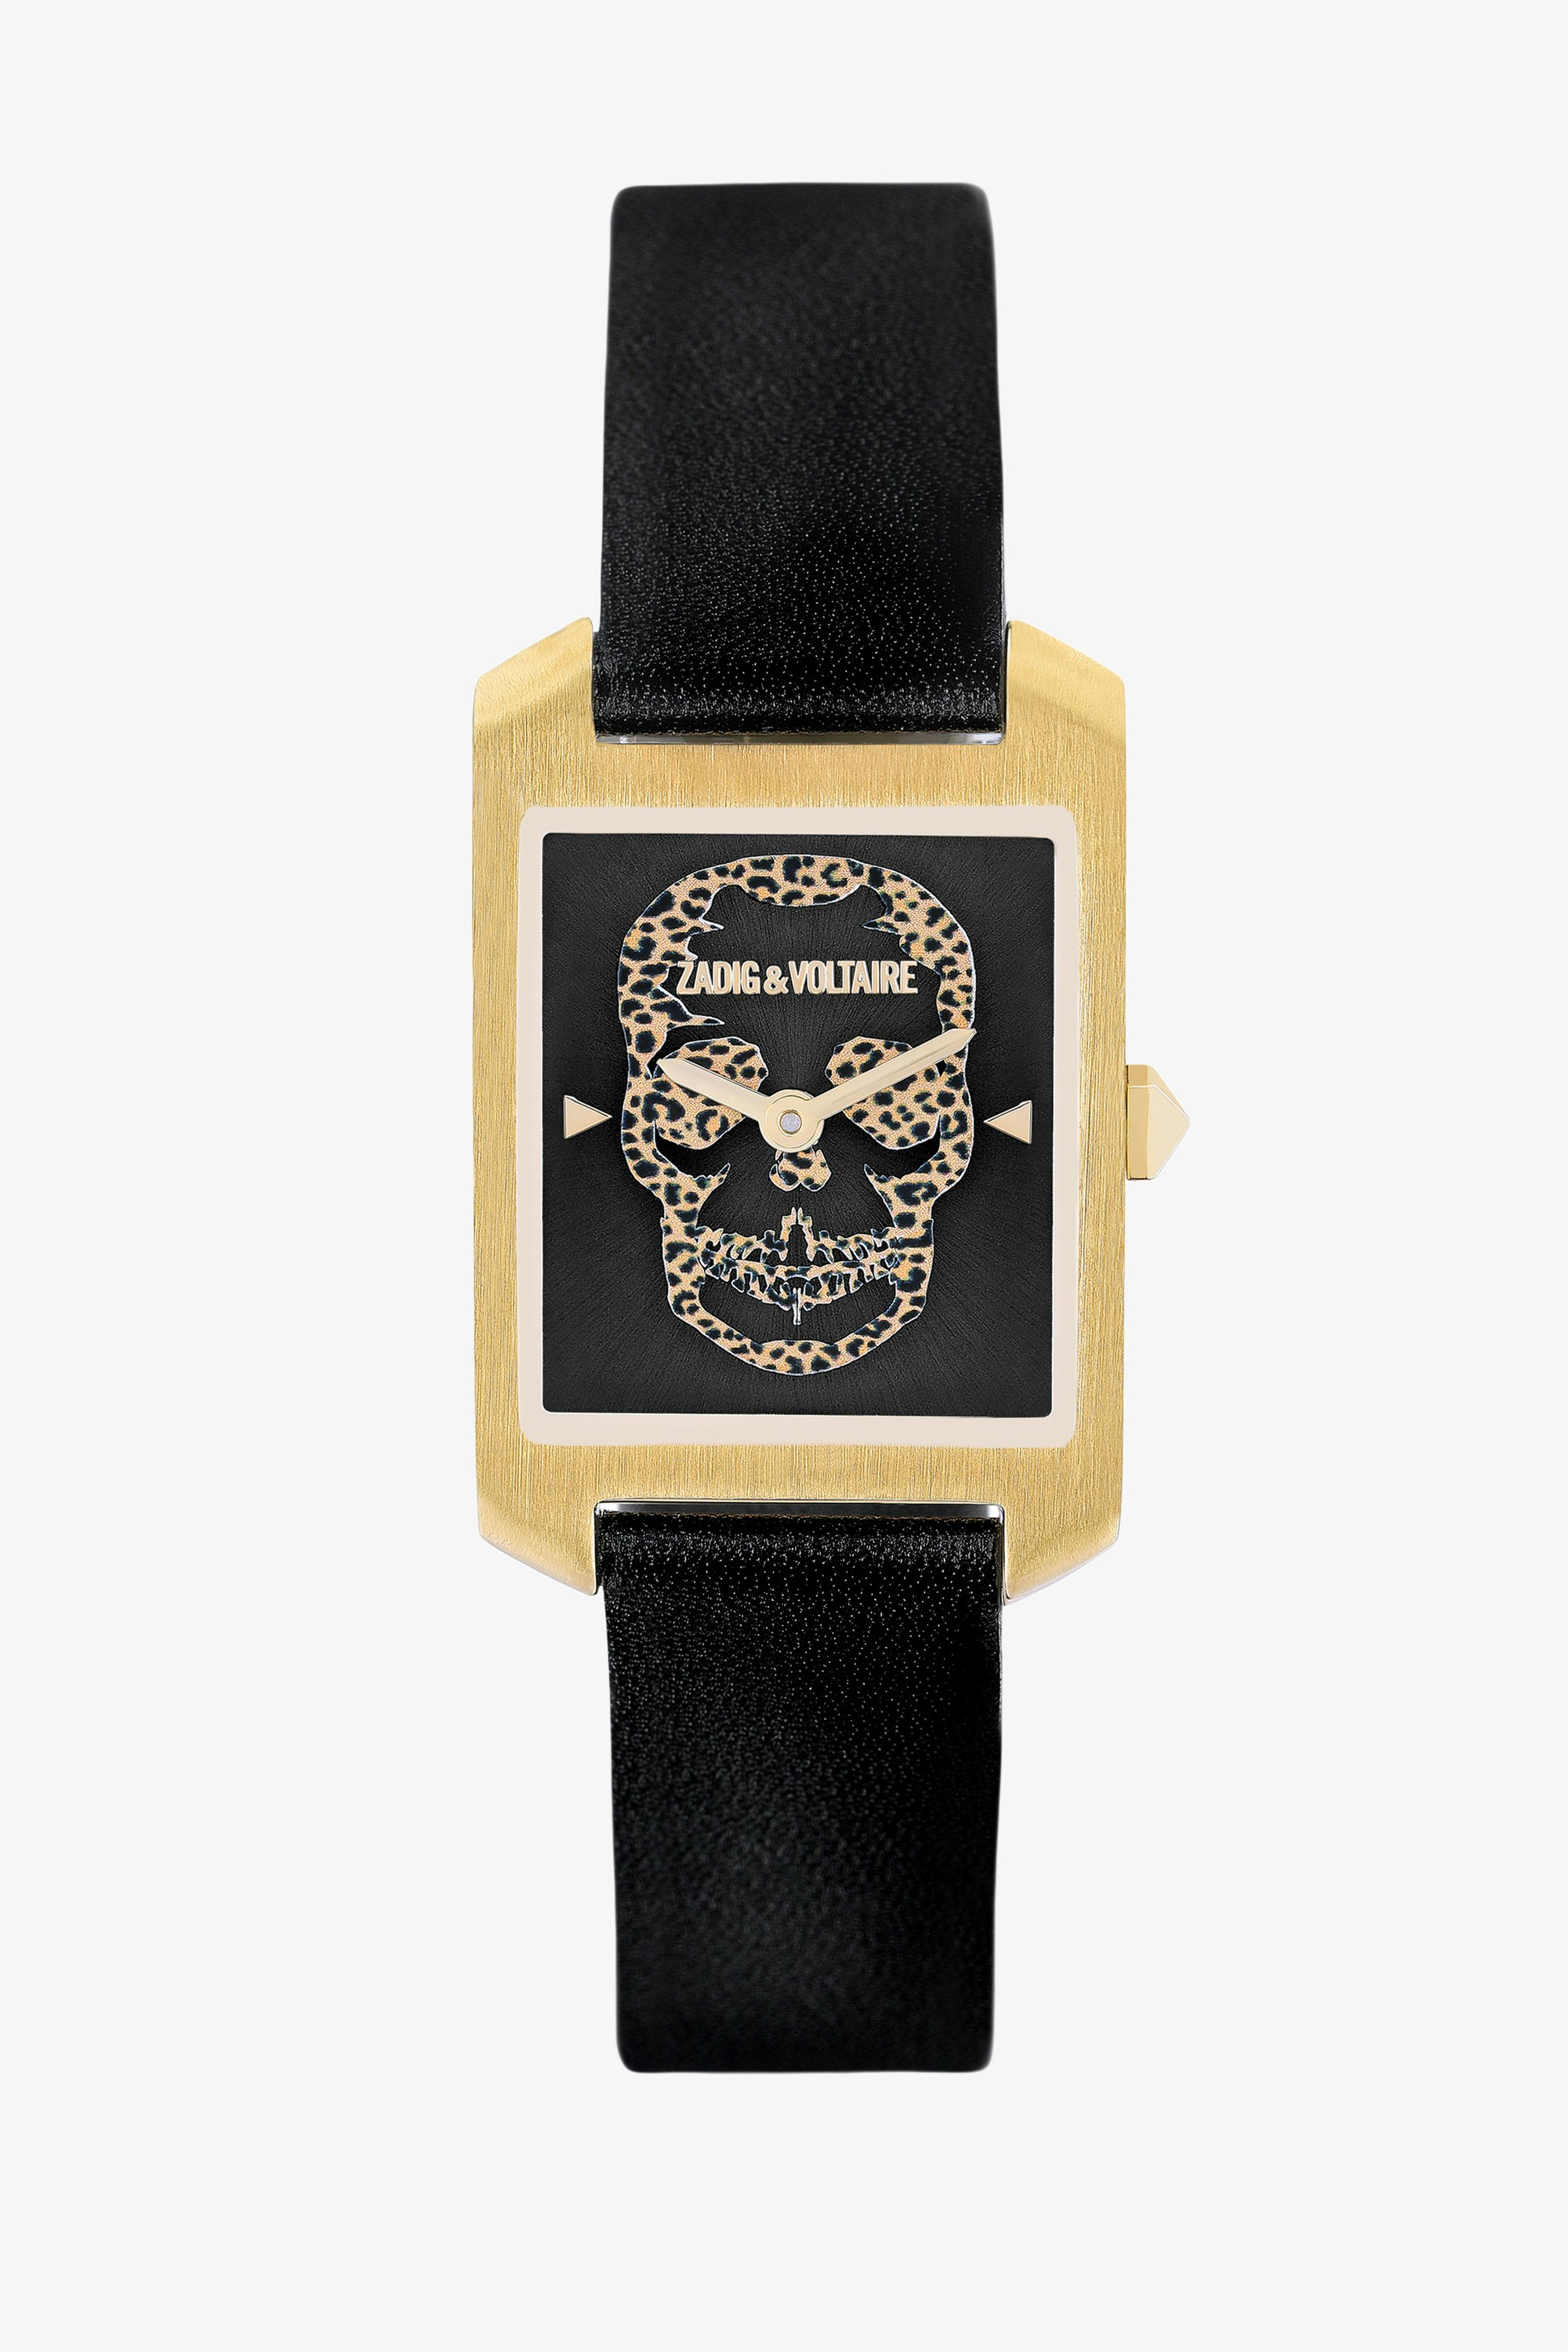 Dial Leo Timeline Watch Women’s gold-tone watch with rectangular dial featuring a leopard-print skull and black leather strap